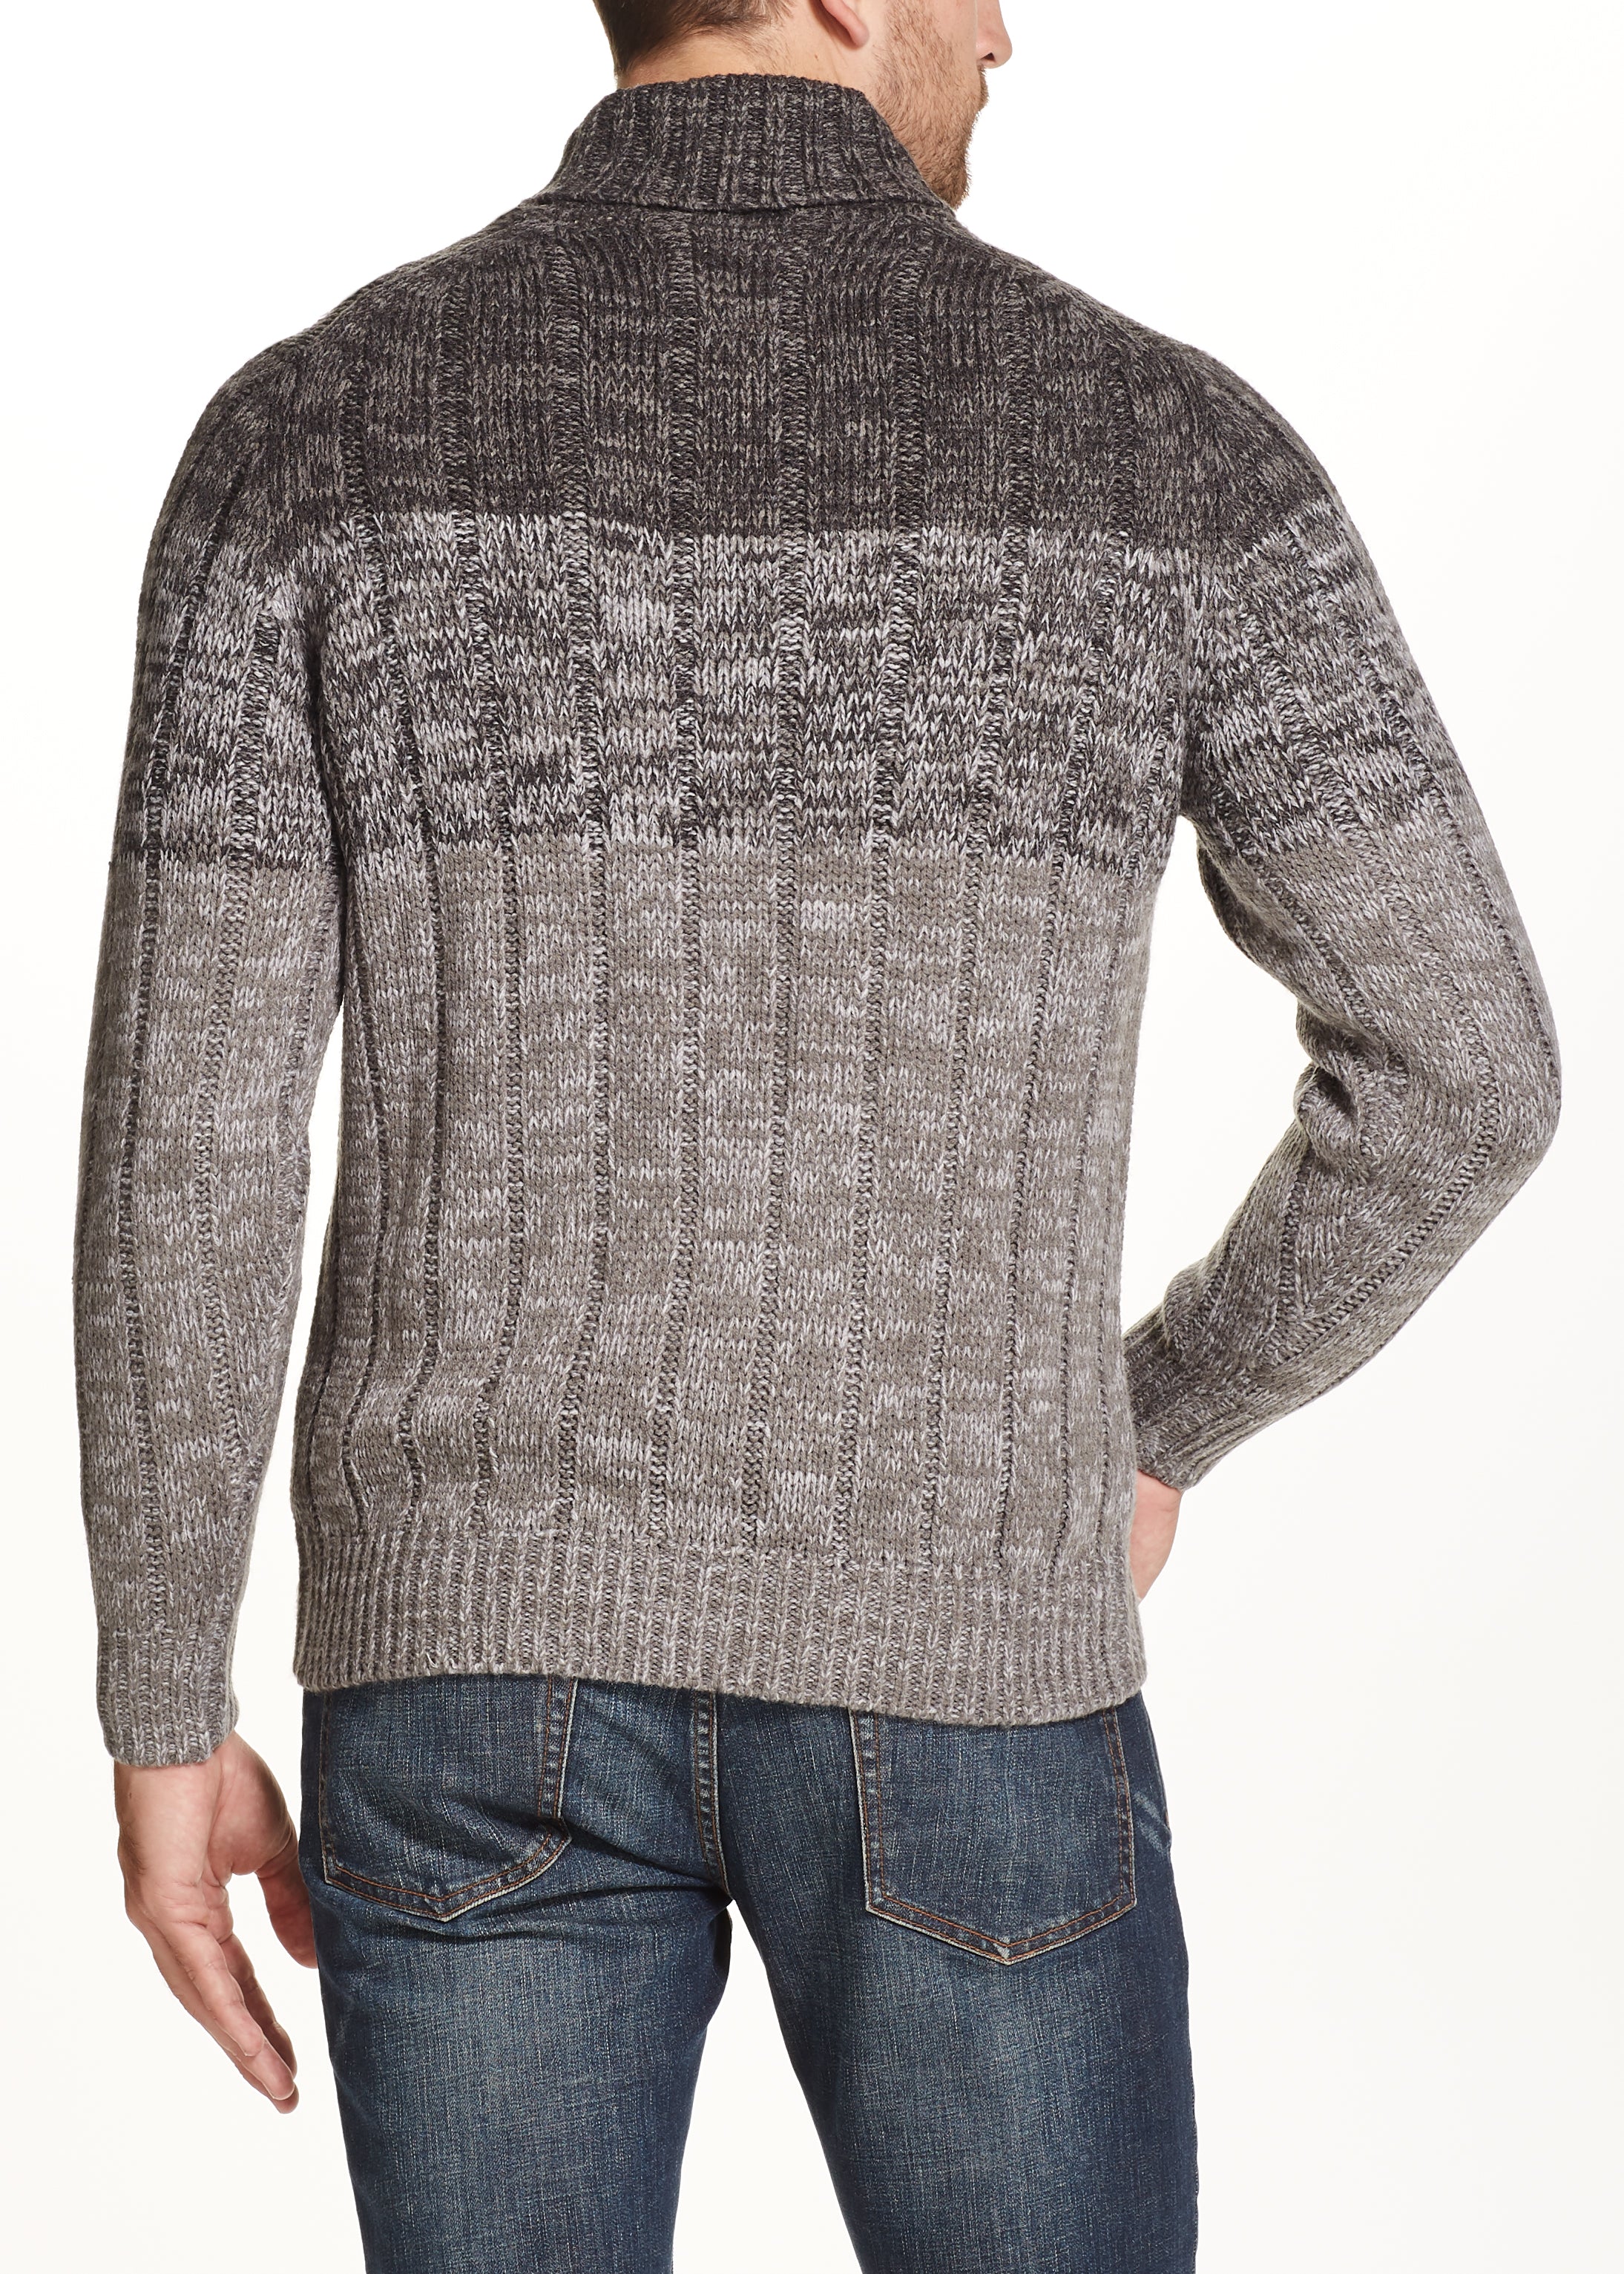 OMBRE SHAWL SWEATER IN CARBON HEATHER